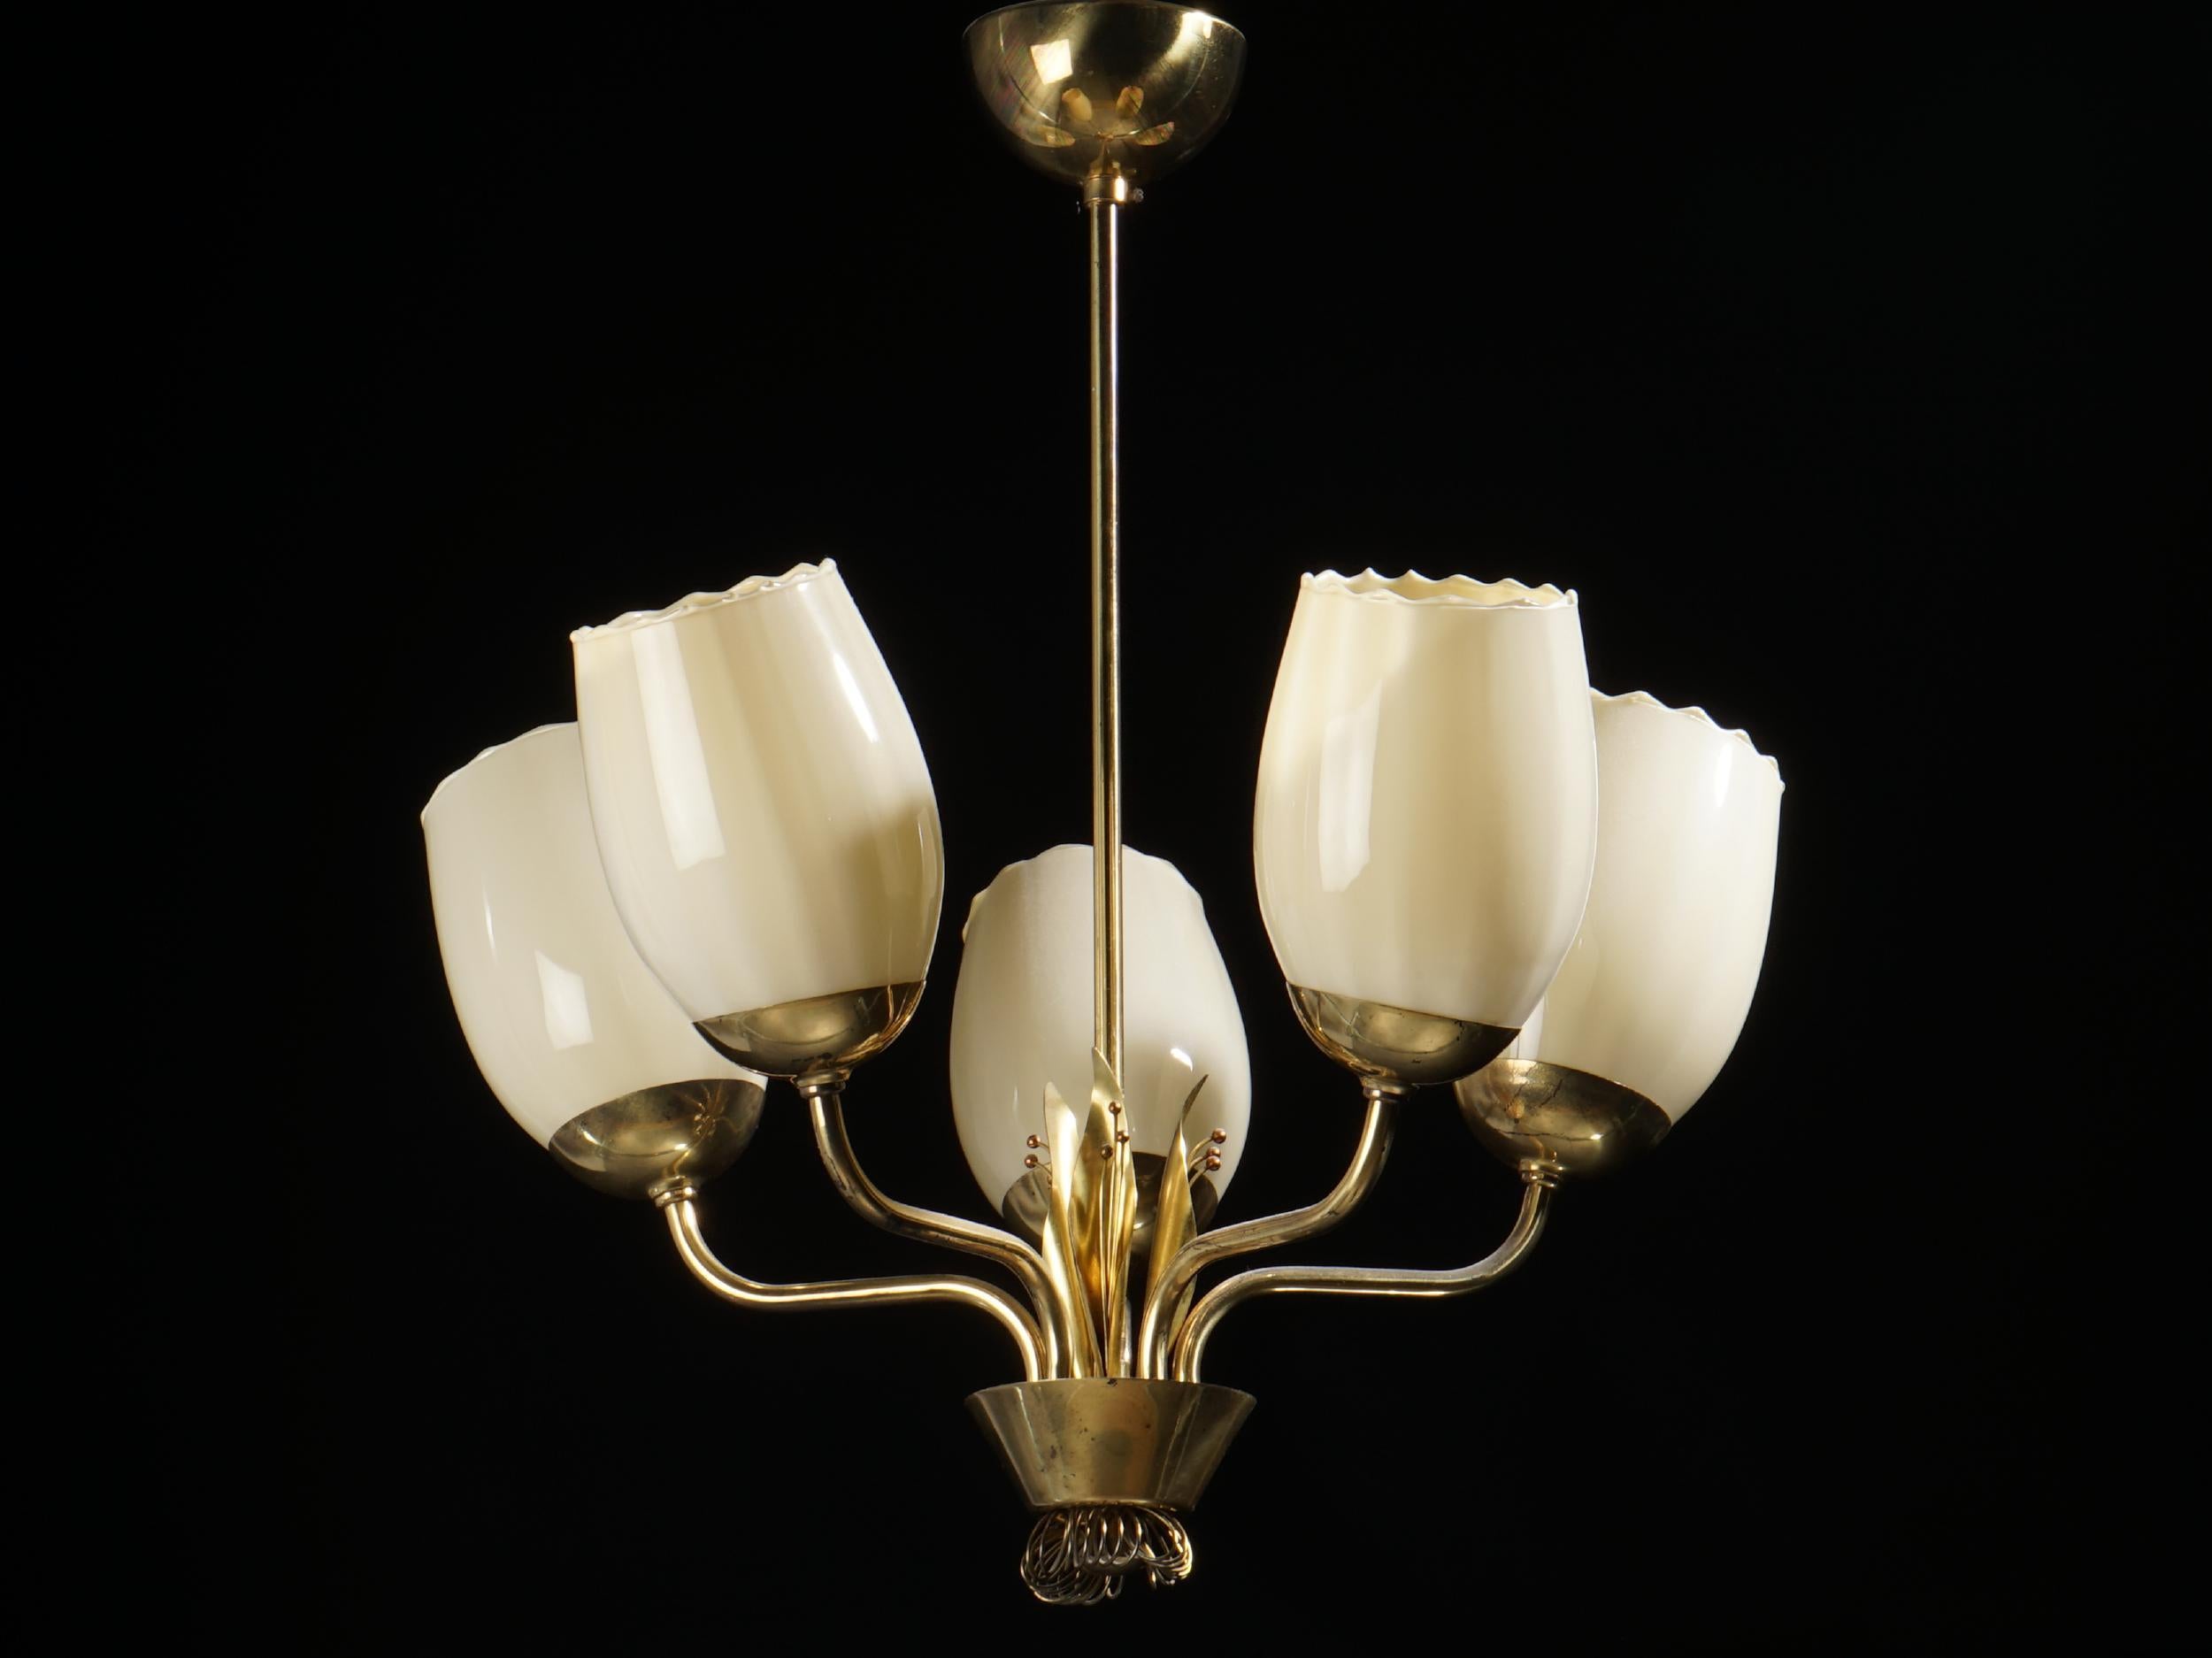 Chandelier / Pendant Ceiling Light by Idman, Finland, 1950s.  Good vintage condition.  Local re-wiring recommended prior to use.  Fast shipping worldwide.





